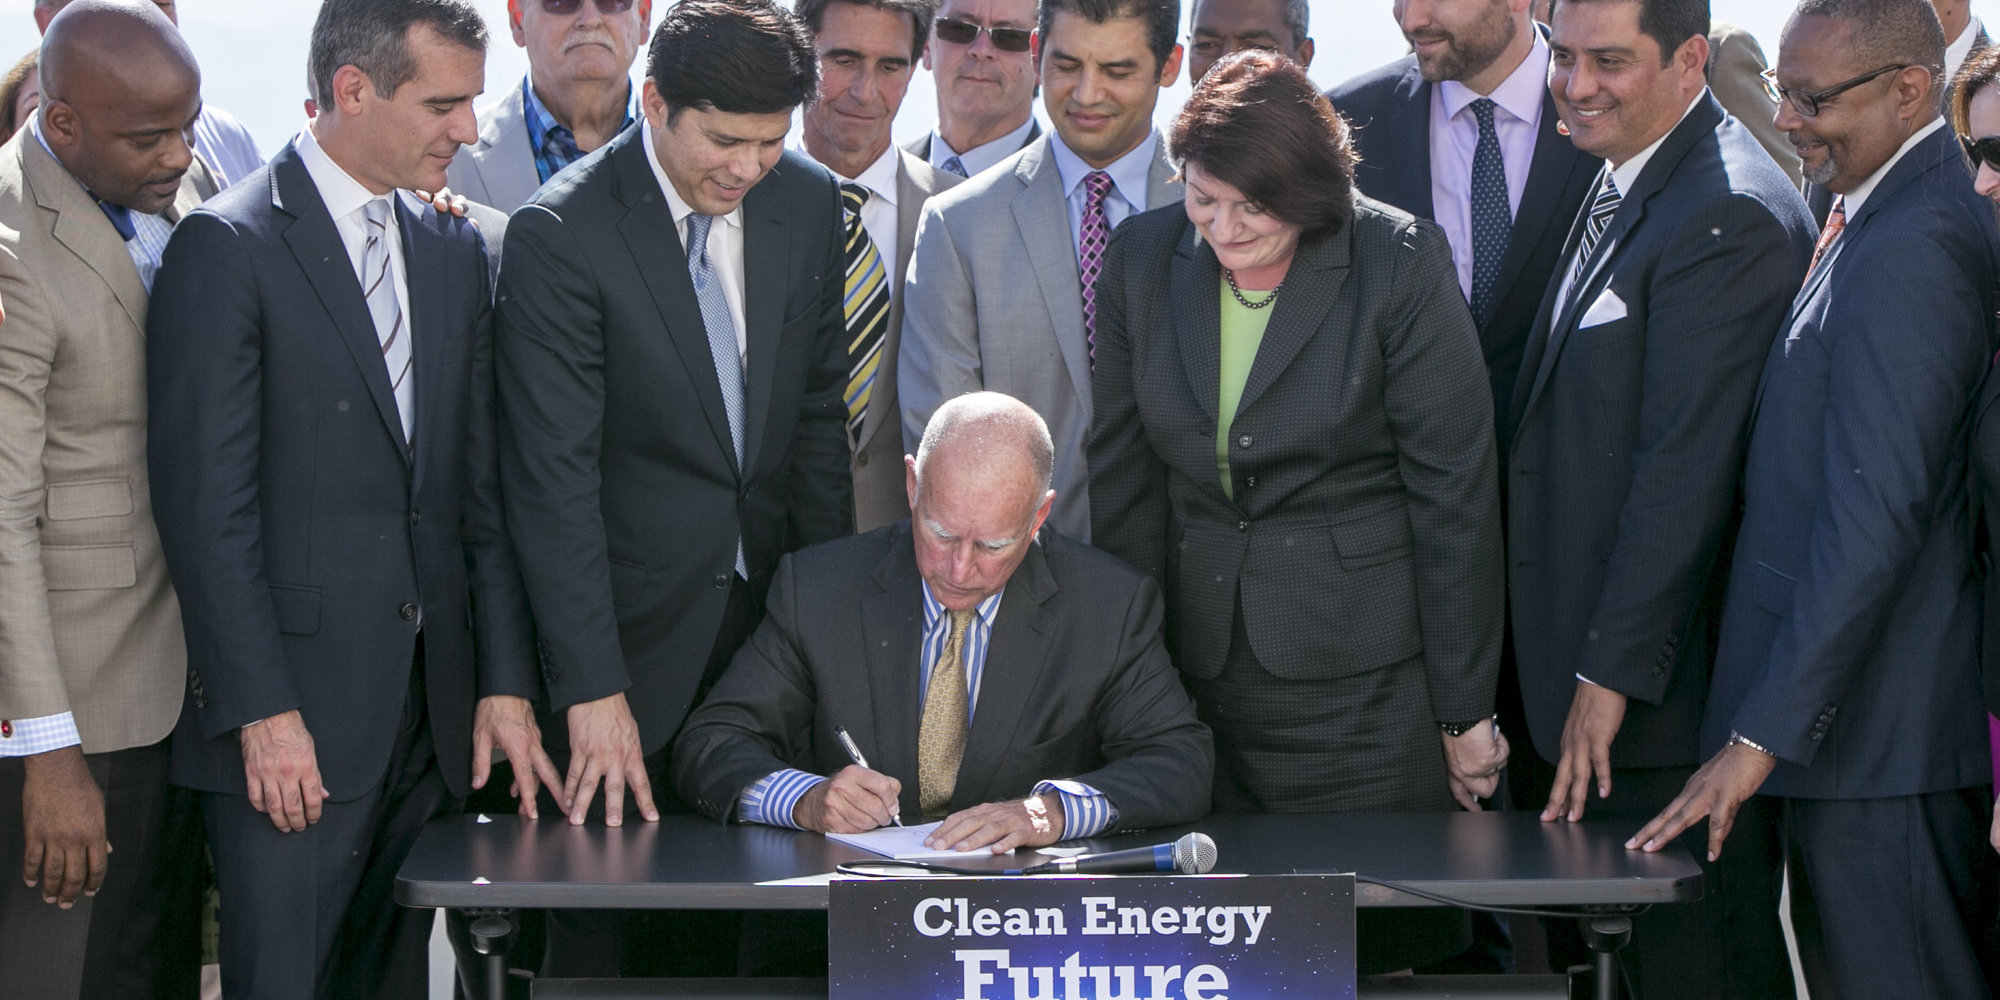 California Gov. Jerry Brown, sitting center, surrounded by government officials, signs landmark legislation, bill SB350 by Senate President pro Tempore Kevin De Leon, third from left, to combat climate change by increasing the state's renewable electricity use to 50 percent and doubling energy efficiency in existing buildings by 2030 at a ceremony at the Griffith Observatory in Los Angeles on Wednesday, Oct. 7, 2015. (AP Photo/Damian Dovarganes)